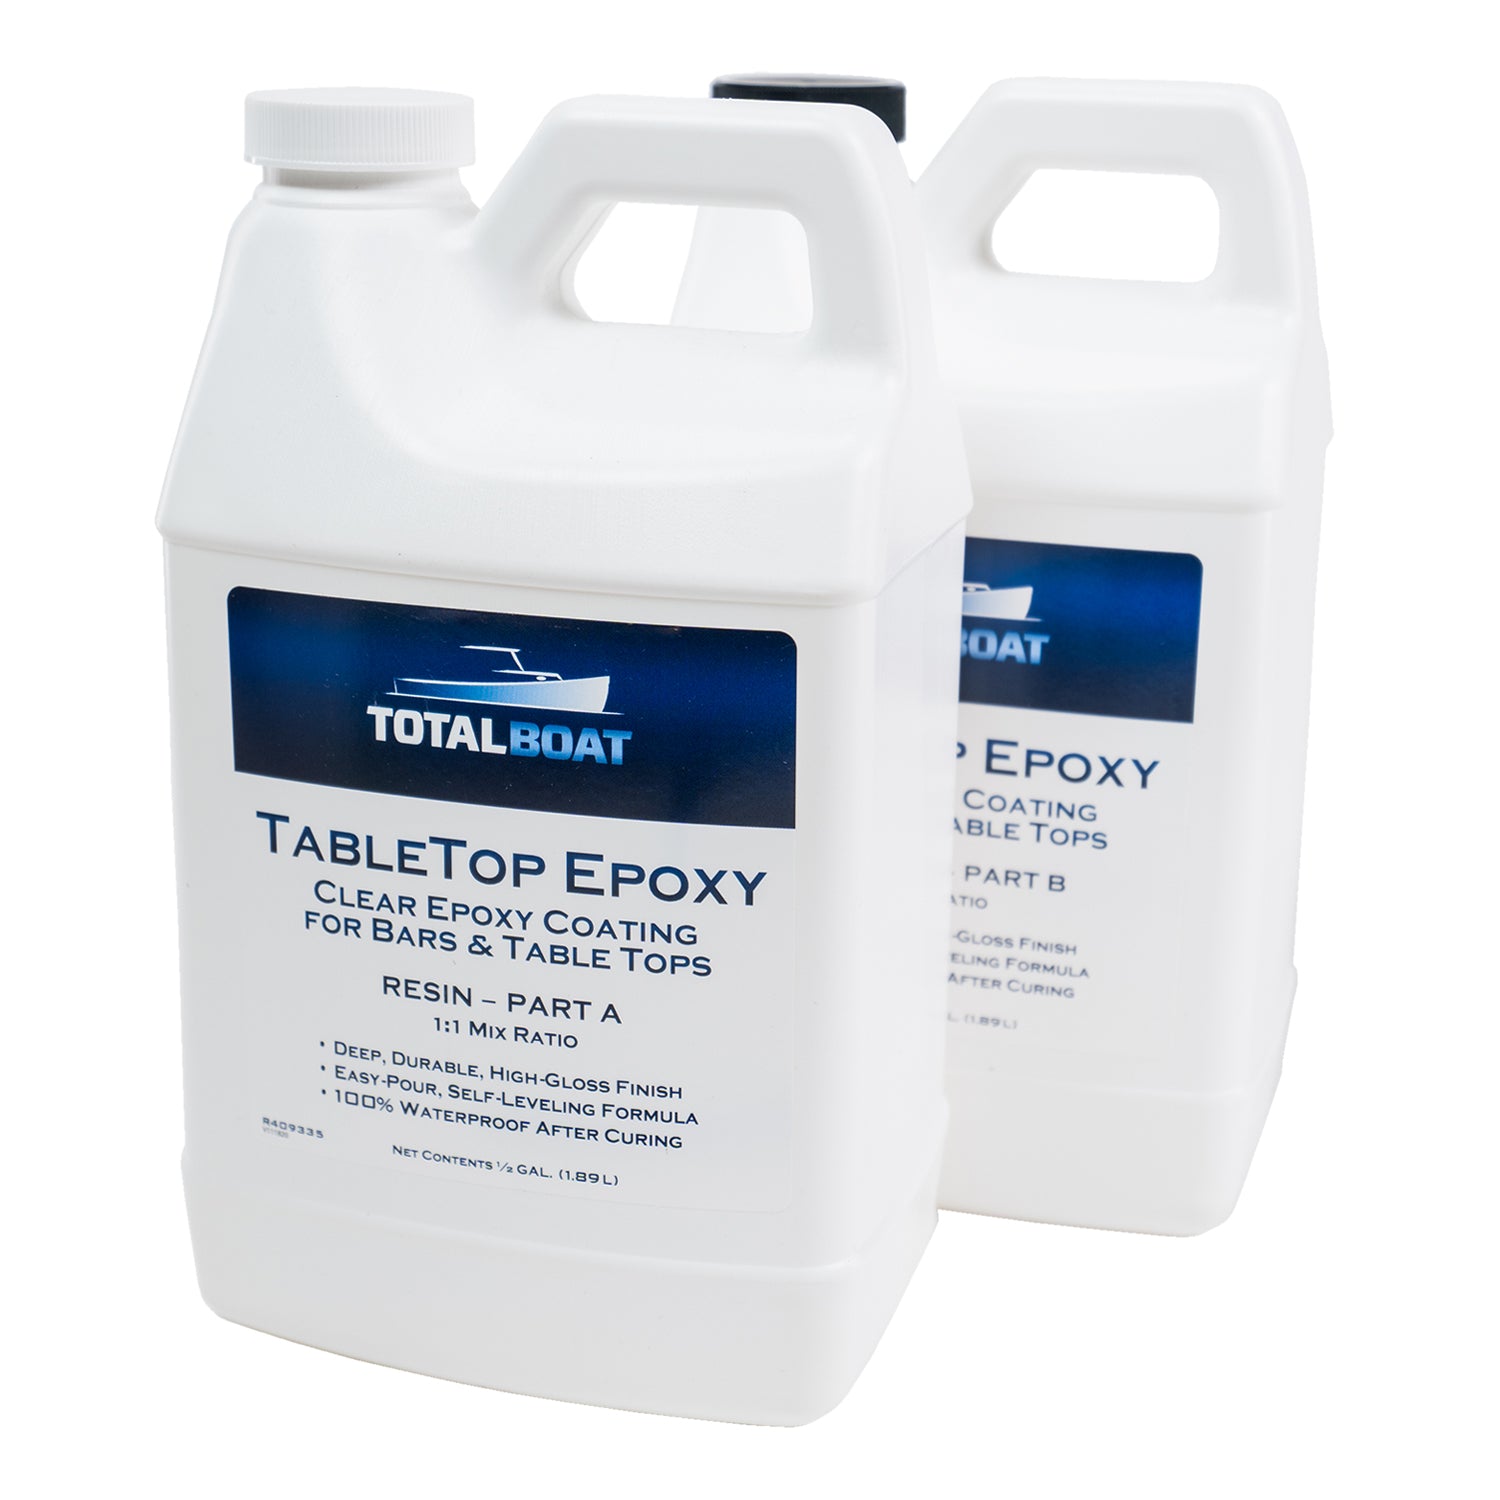 TotalBoat Tabletop Epoxy Crystal Clear Resin 2 Quart Kit for Bars & Tables